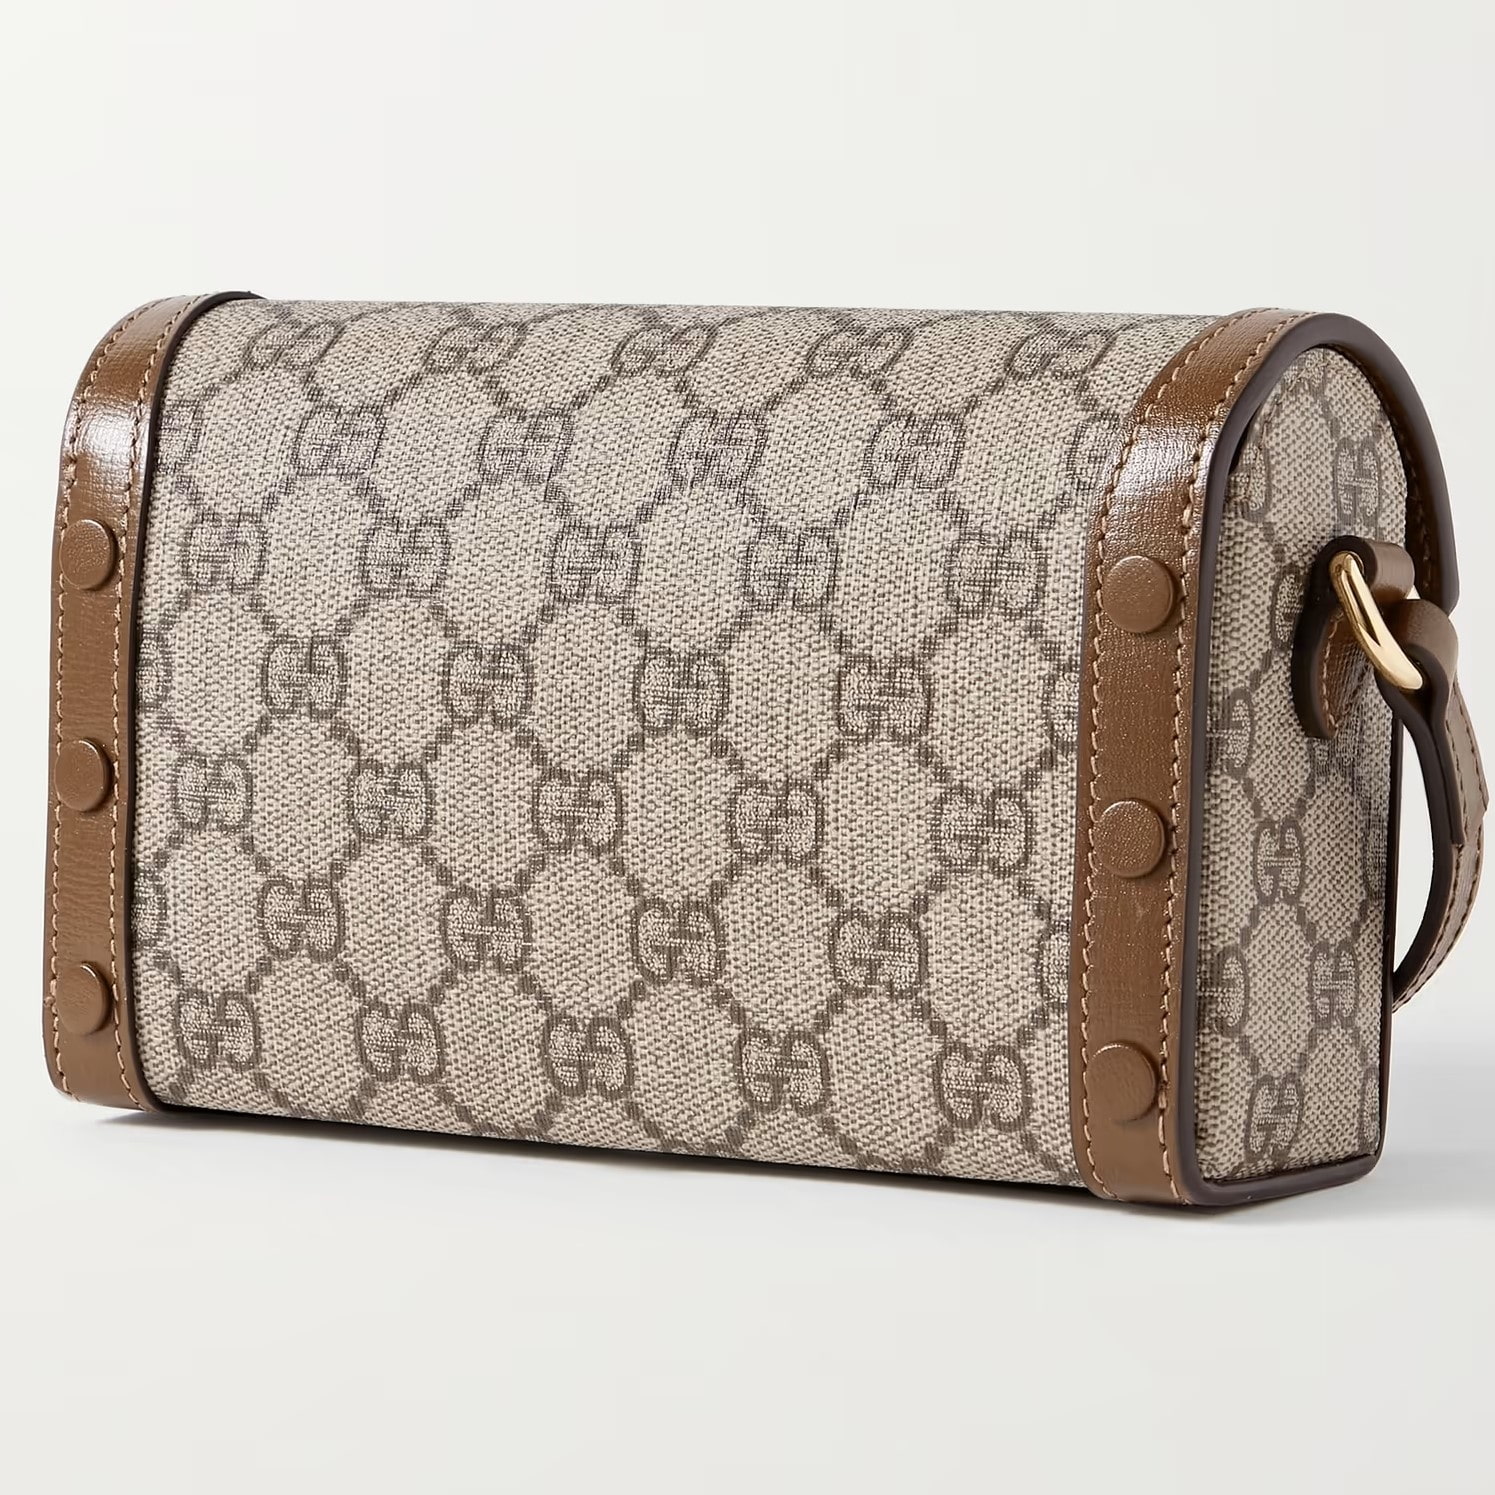 TÚI XÁCH NỮ GUCCI HORSEBIT 1955 BROWN LEATHER TRIMMED PRINTED COATED CANVAS SHOULDER BAG 5